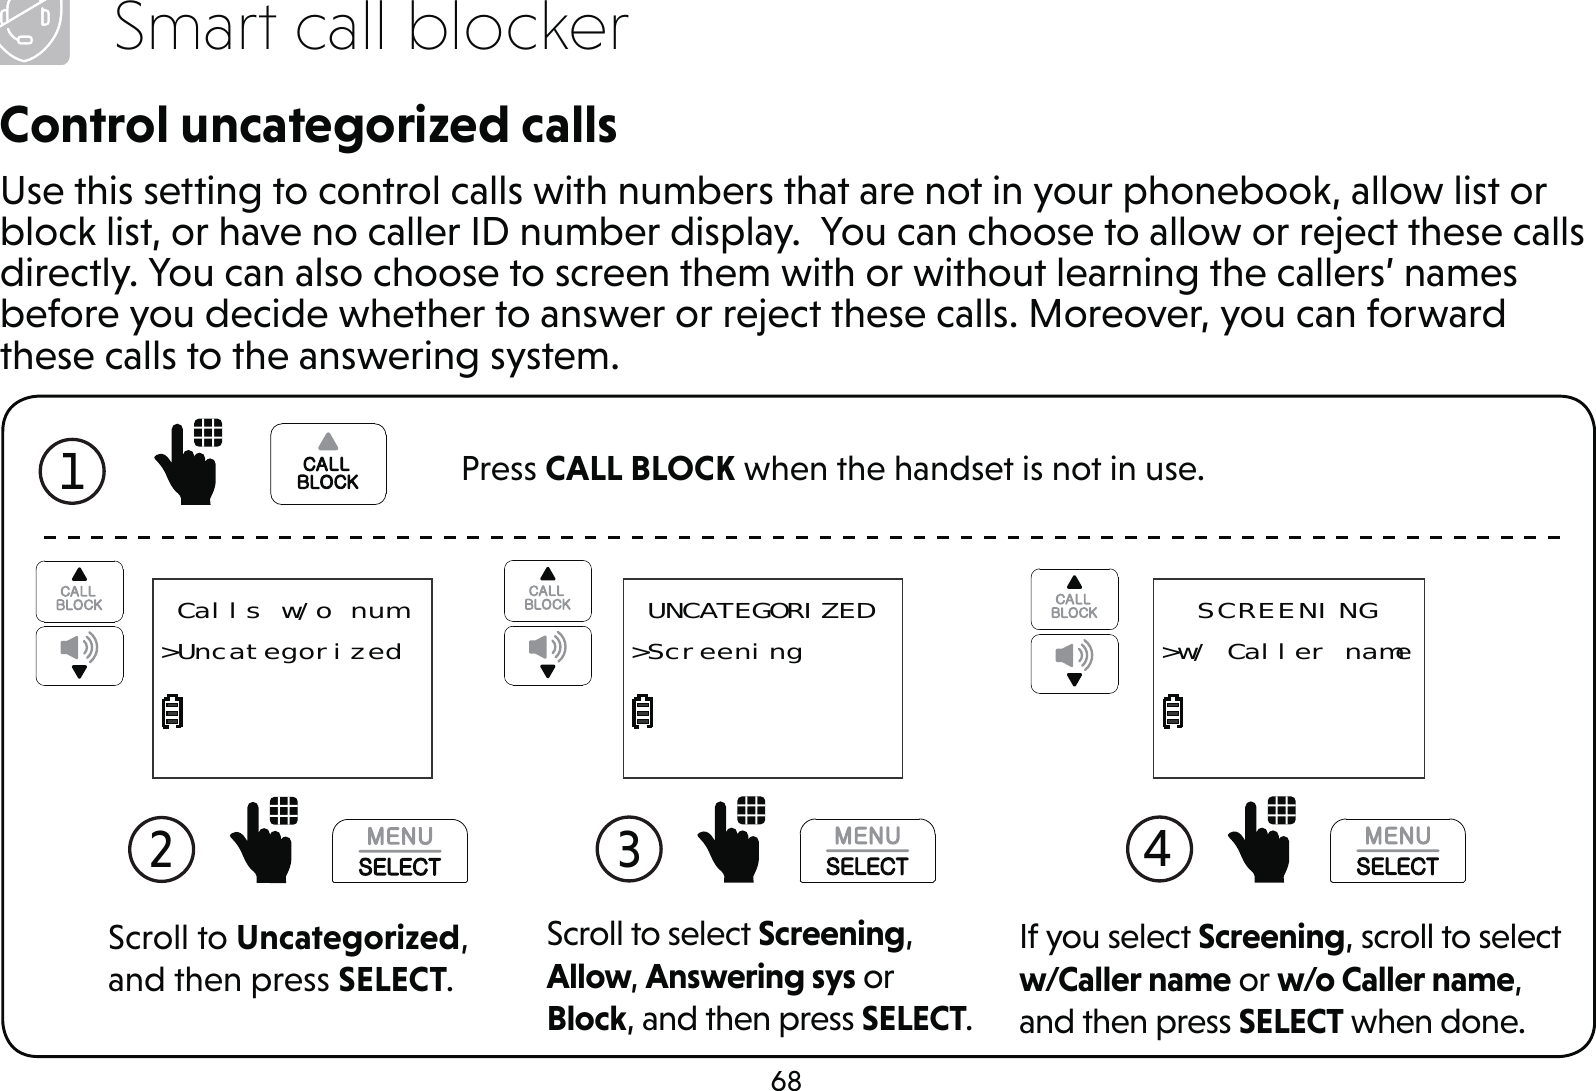 68Smart call blockerControl uncategorized callsUse this setting to control calls with numbers that are not in your phonebook, allow list or block list, or have no caller ID number display.  You can choose to allow or reject these calls directly. You can also choose to screen them with or without learning the callers’ names before you decide whether to answer or reject these calls. Moreover, you can forward these calls to the answering system.Scroll to Uncategorized, and then press SELECT.2  Calls w/o num&gt;UncategorizedScroll to select Screening, Allow, Answering sys or Block, and then press SELECT.3  UNCATEGORIZED&gt;ScreeningIf you select Screening, scroll to select w/Caller name or w/o Caller name, and then press SELECT when done.4 SCREENING&gt;w/ Caller name1  Press CALL BLOCK when the handset is not in use.